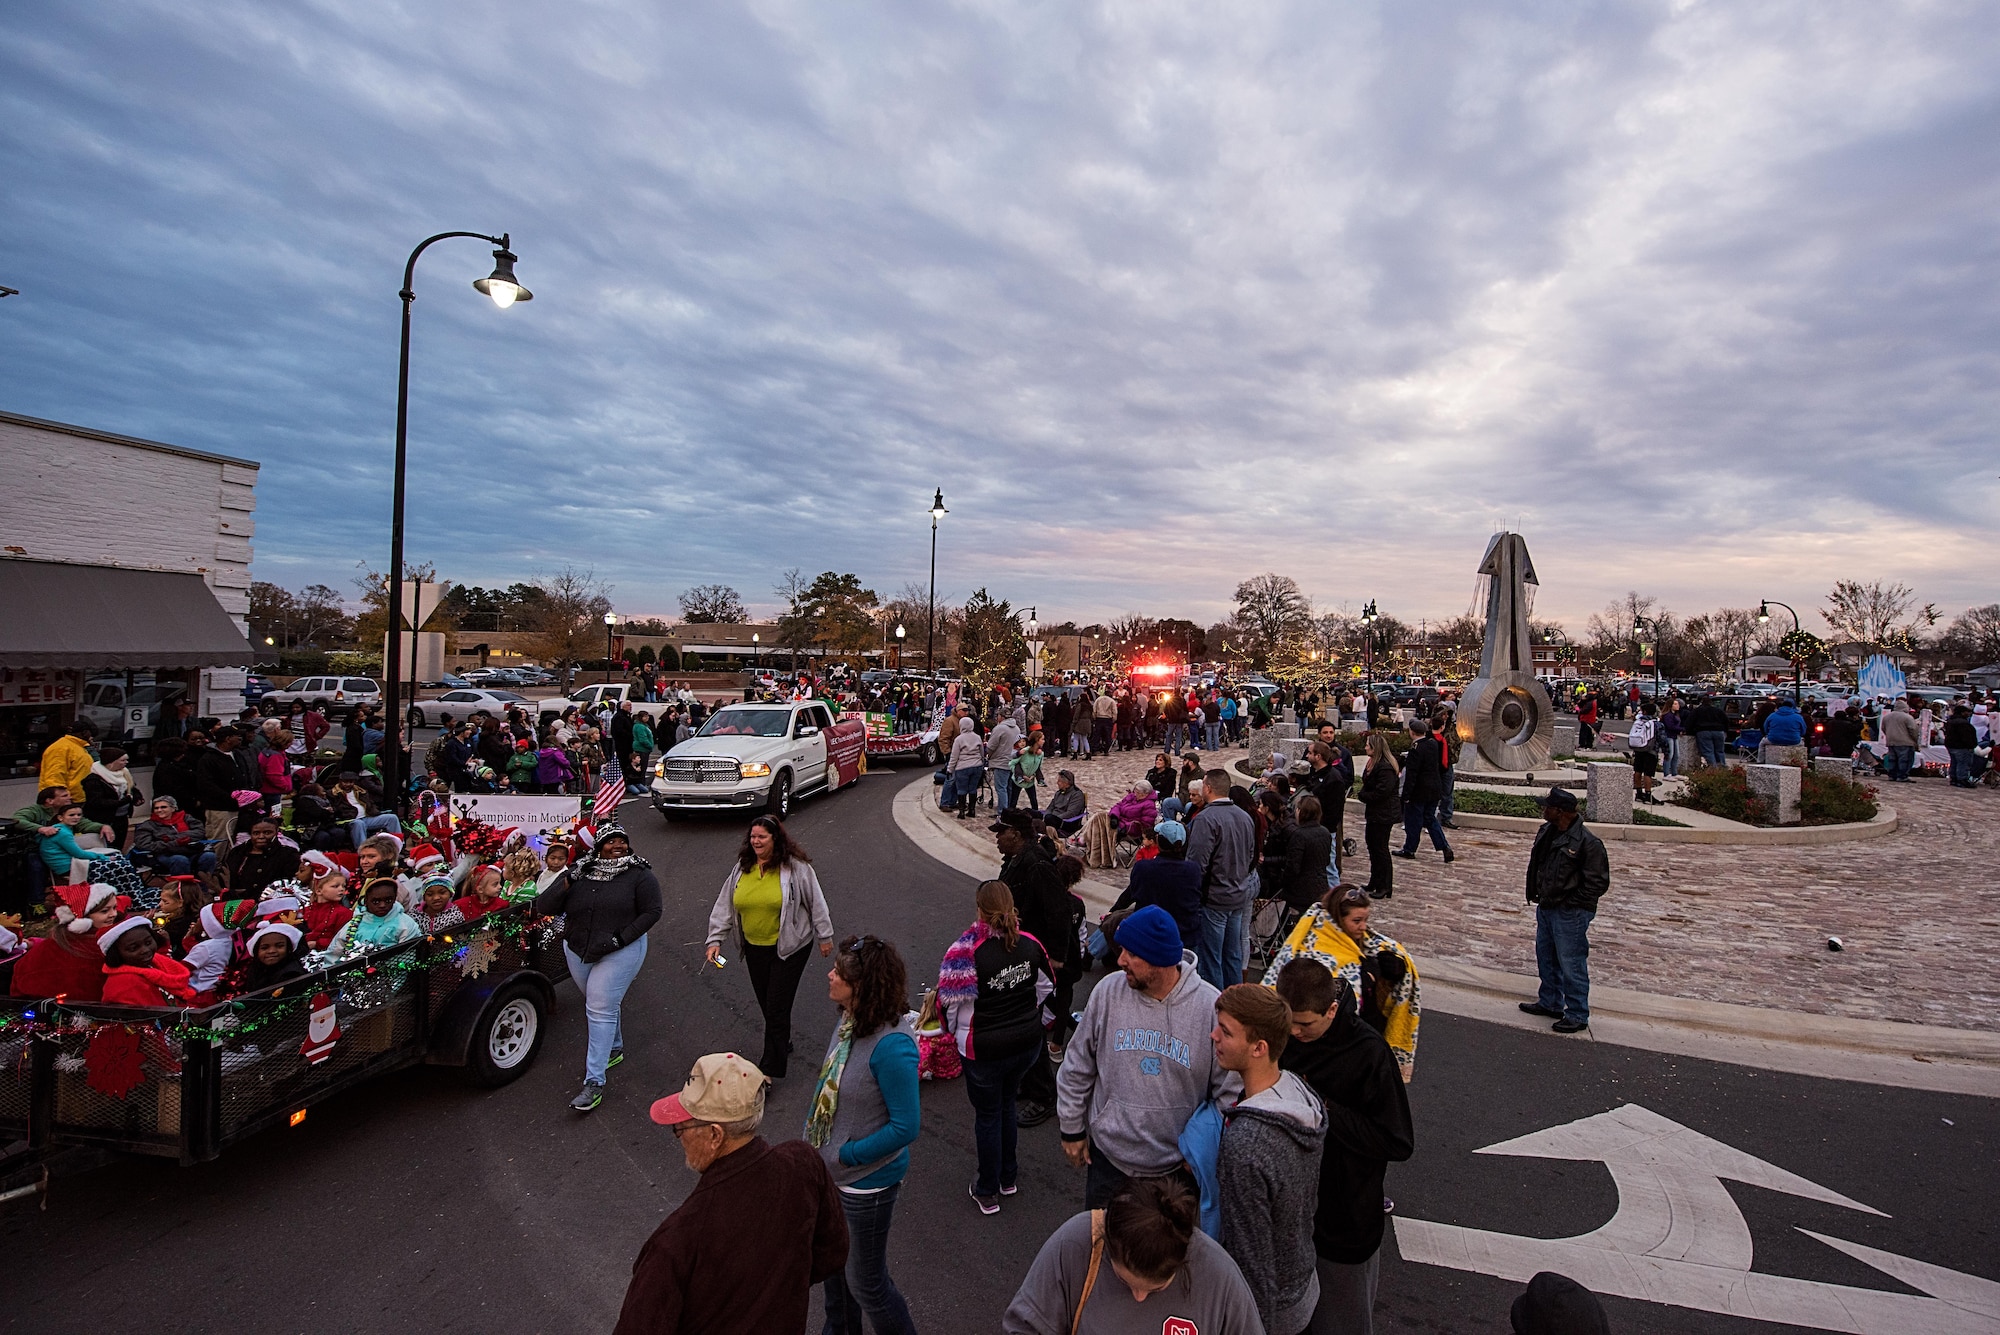 More than 500 people watch as floats drive by during a Christmas Parade, Dec. 3, 2016, in Downtown Goldsboro, North Carolina. The parade began with Col. Christopher Sage, 4th Fighter Wing commander, who was the grand marshal of the parade. (U.S. Air Force photo by Airman Shawna L. Keyes)